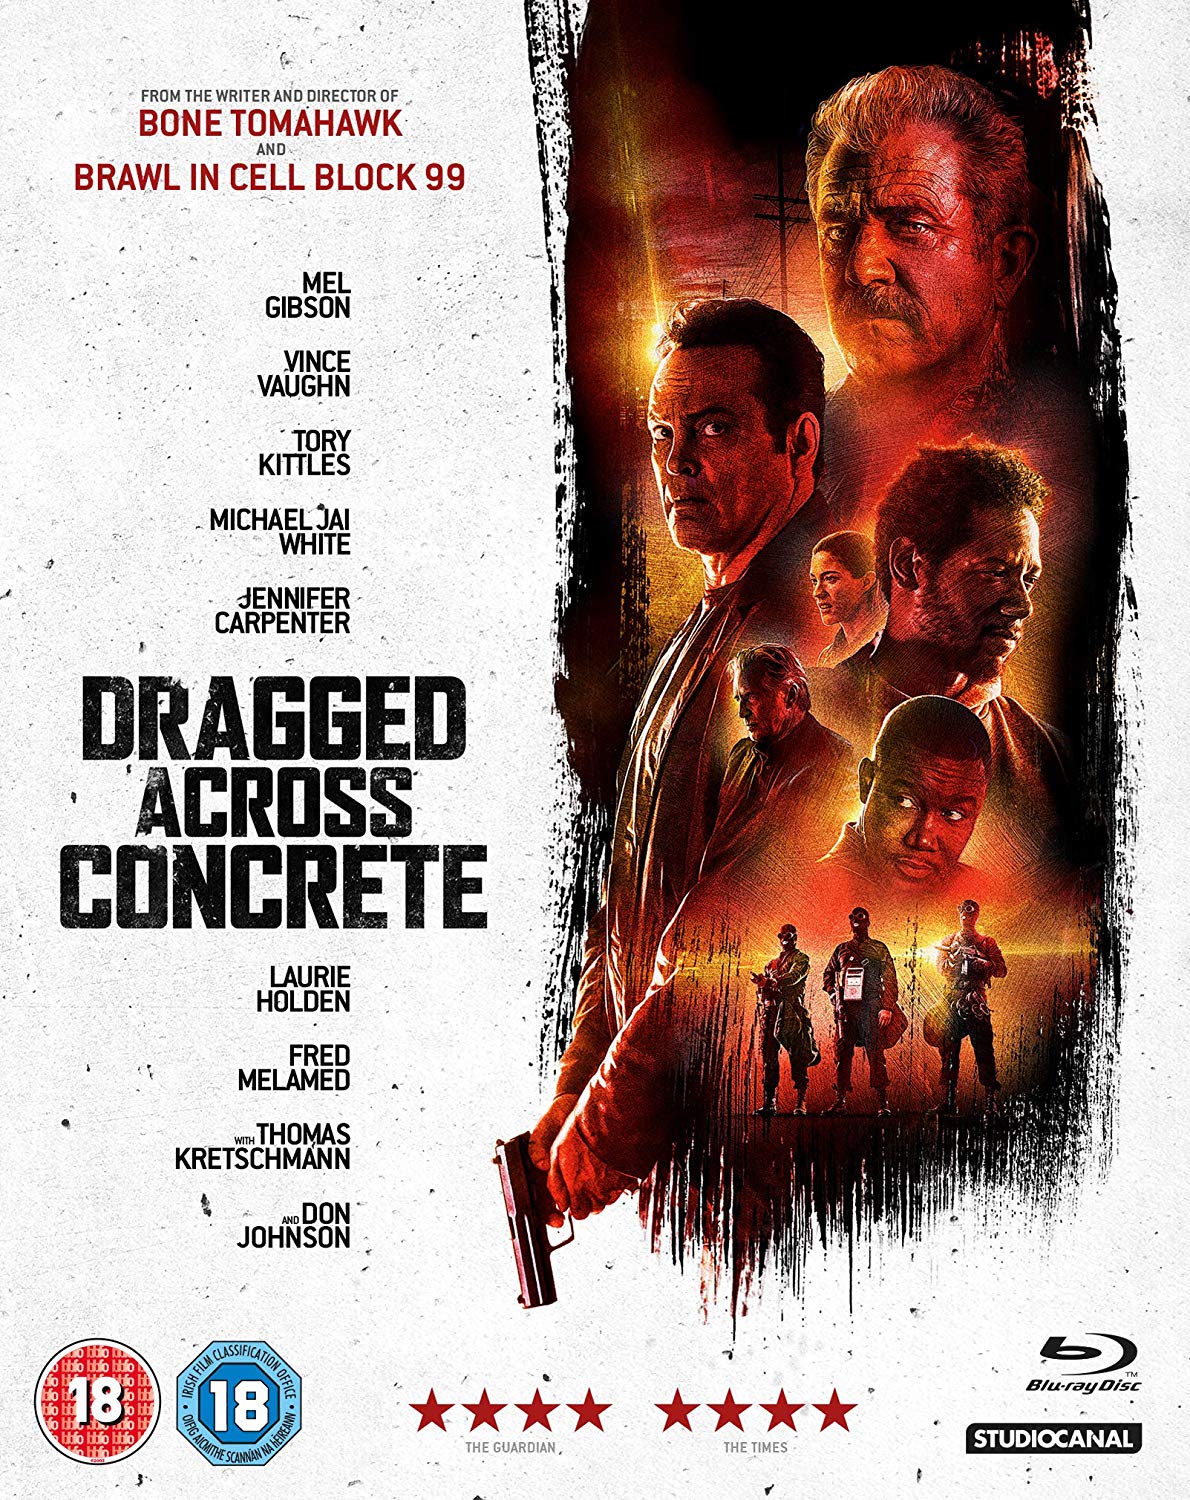 boom competitions - dragged across concrete